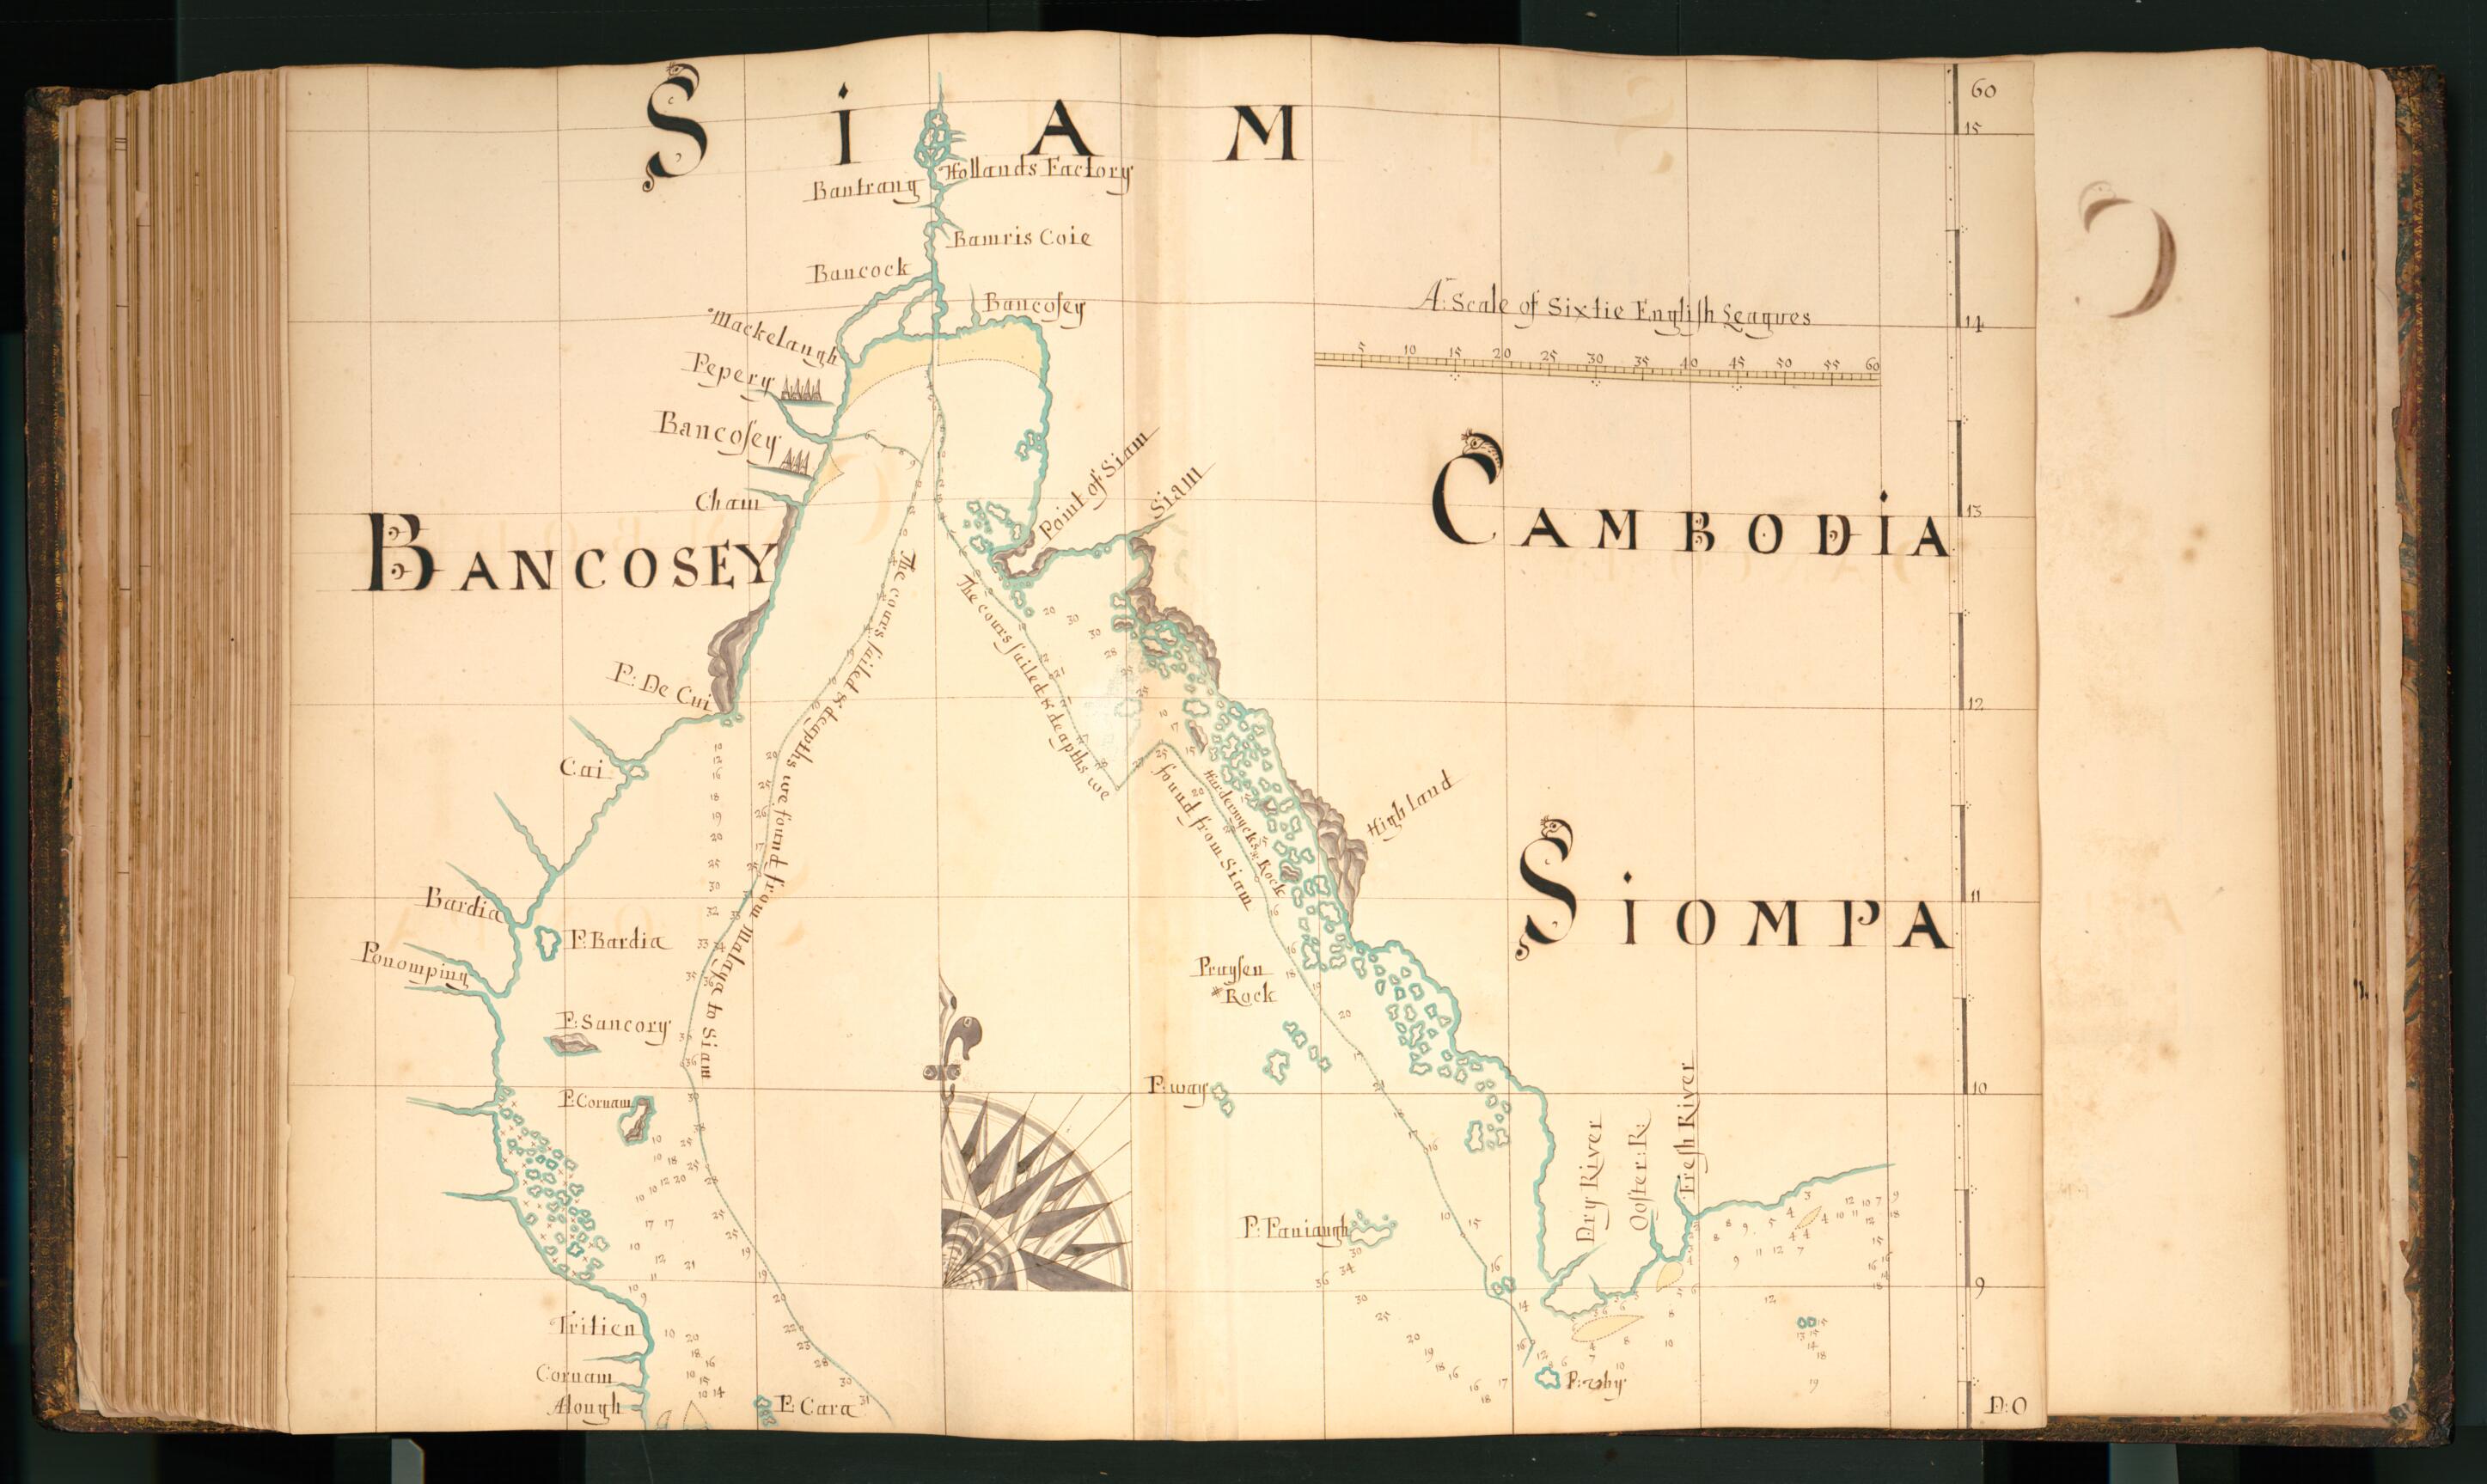 This old map of 60) Bancosey, Siam, Cambodia, Siompa from Buccaneer Atlas from 1690 was created by William Hacke in 1690